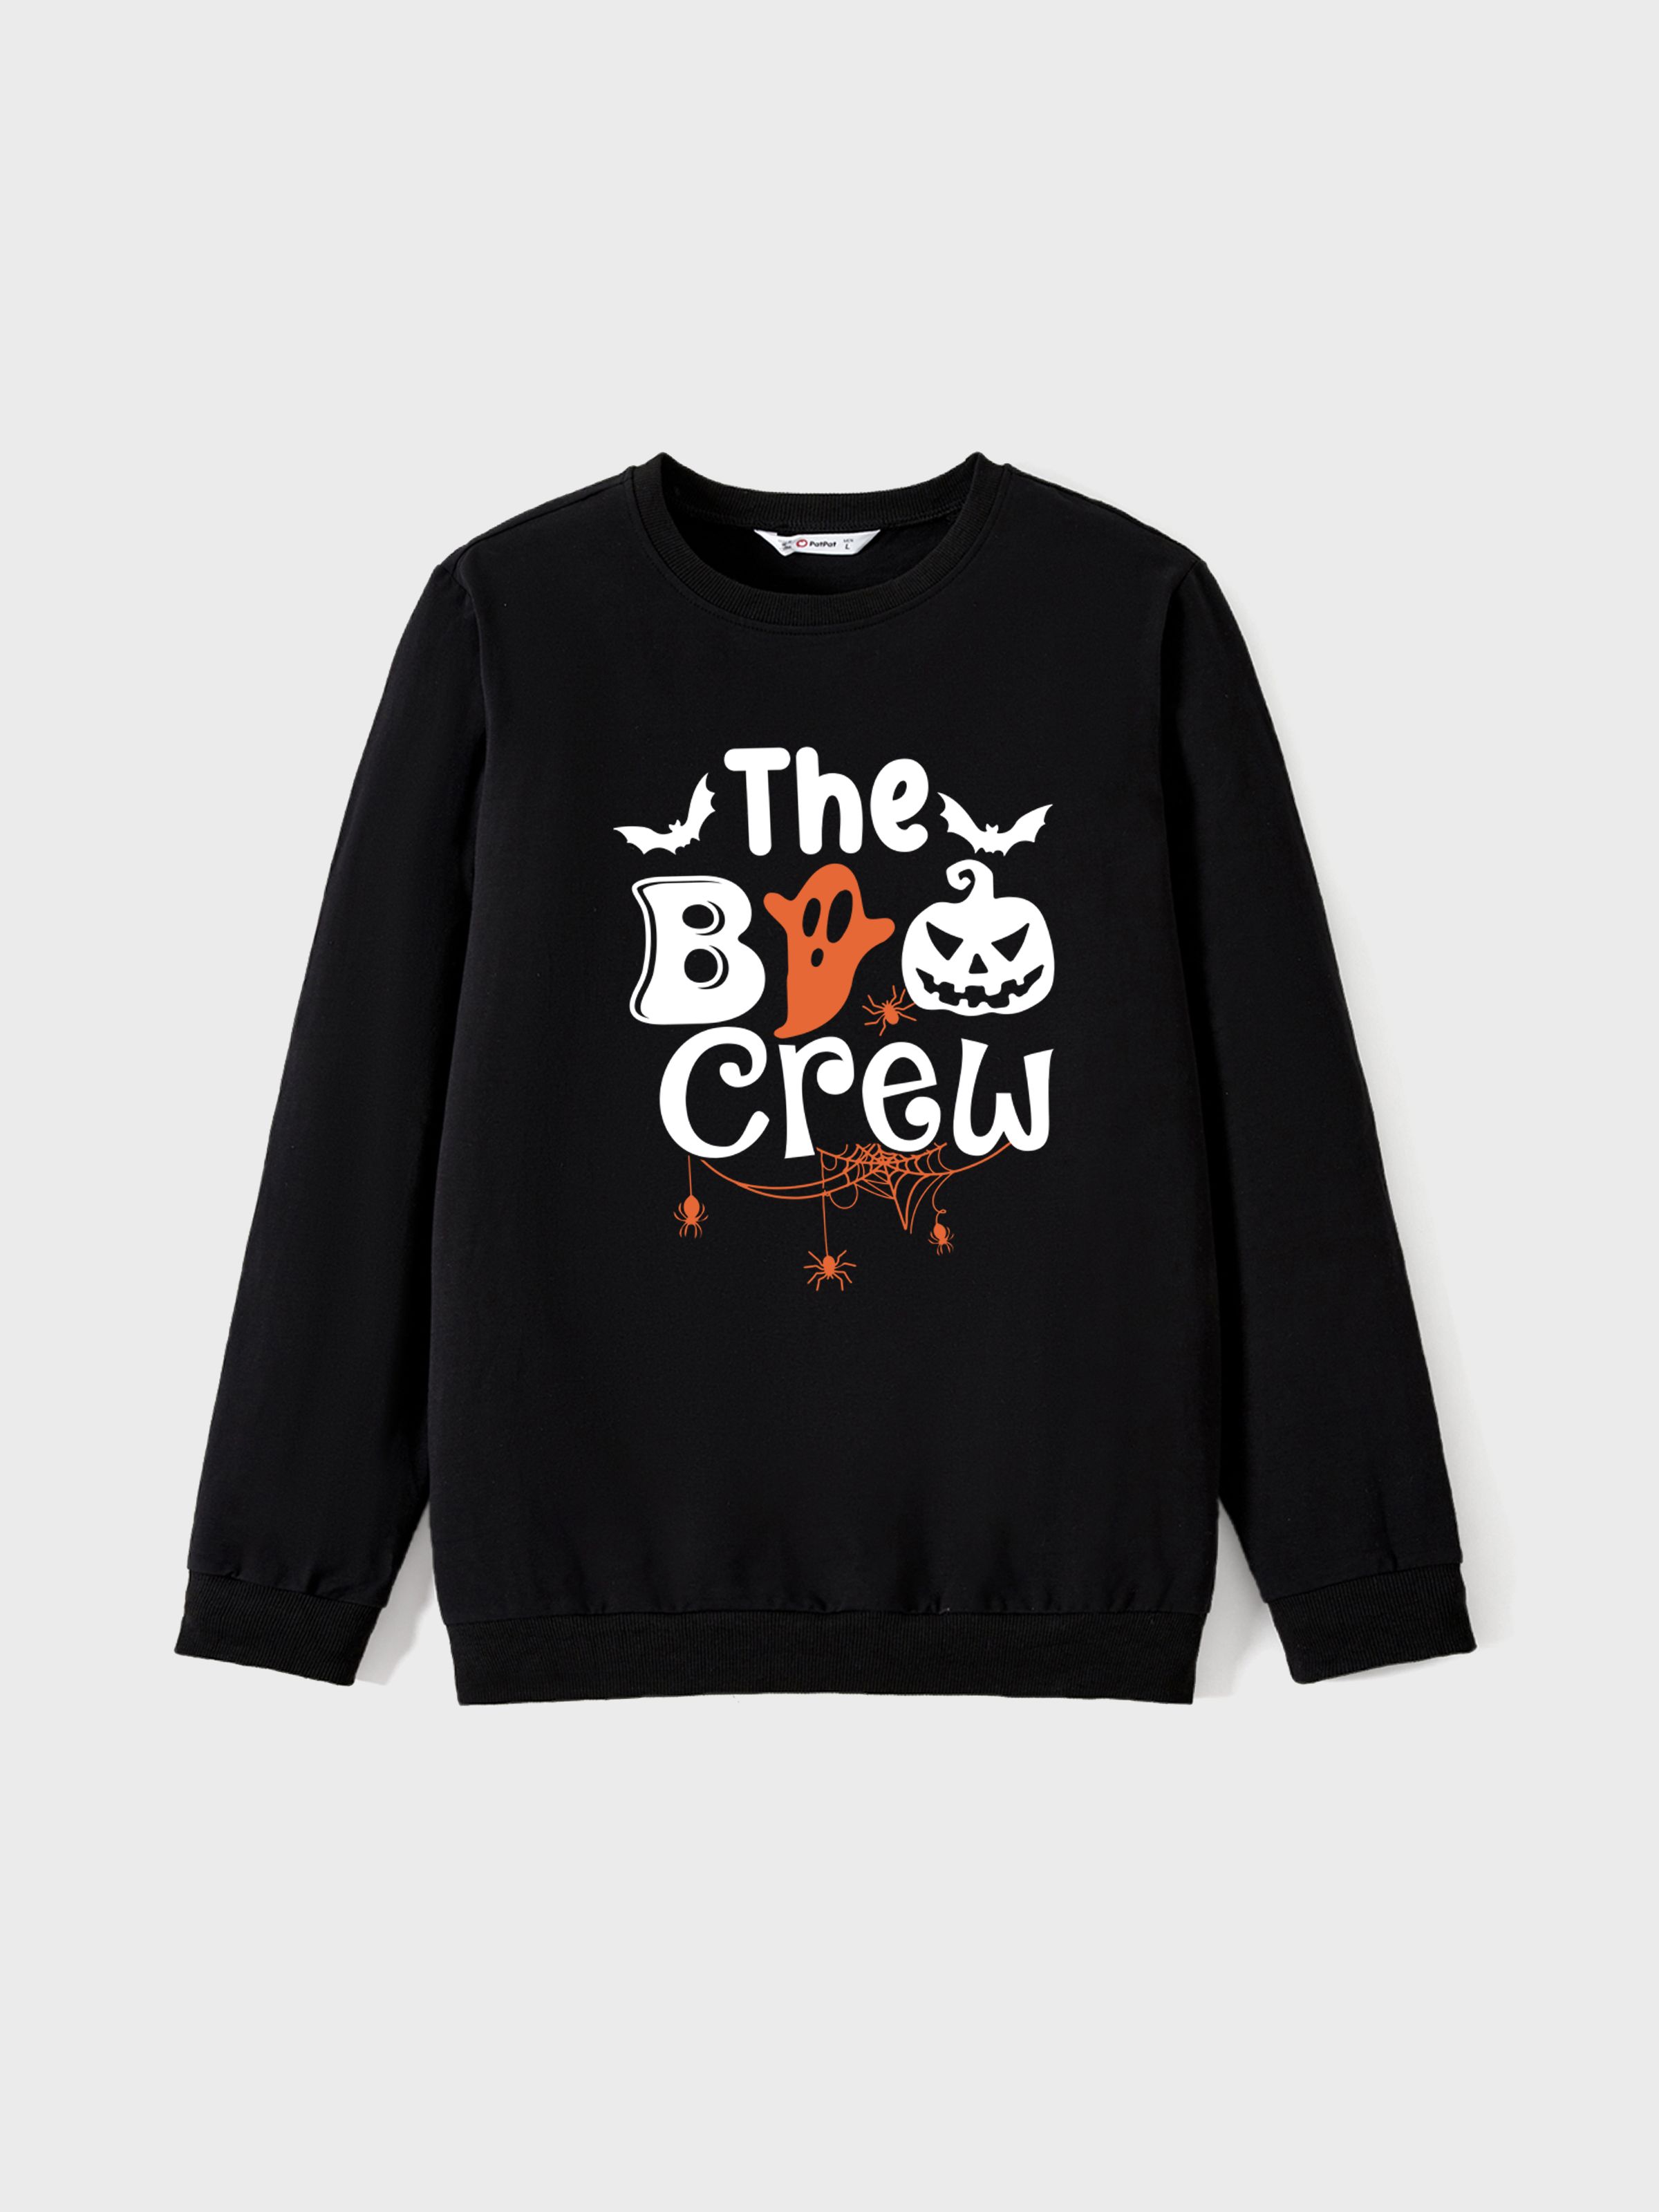 

Halloween Family Matching Spooky The Boo Grew Ghost Graphic Tops